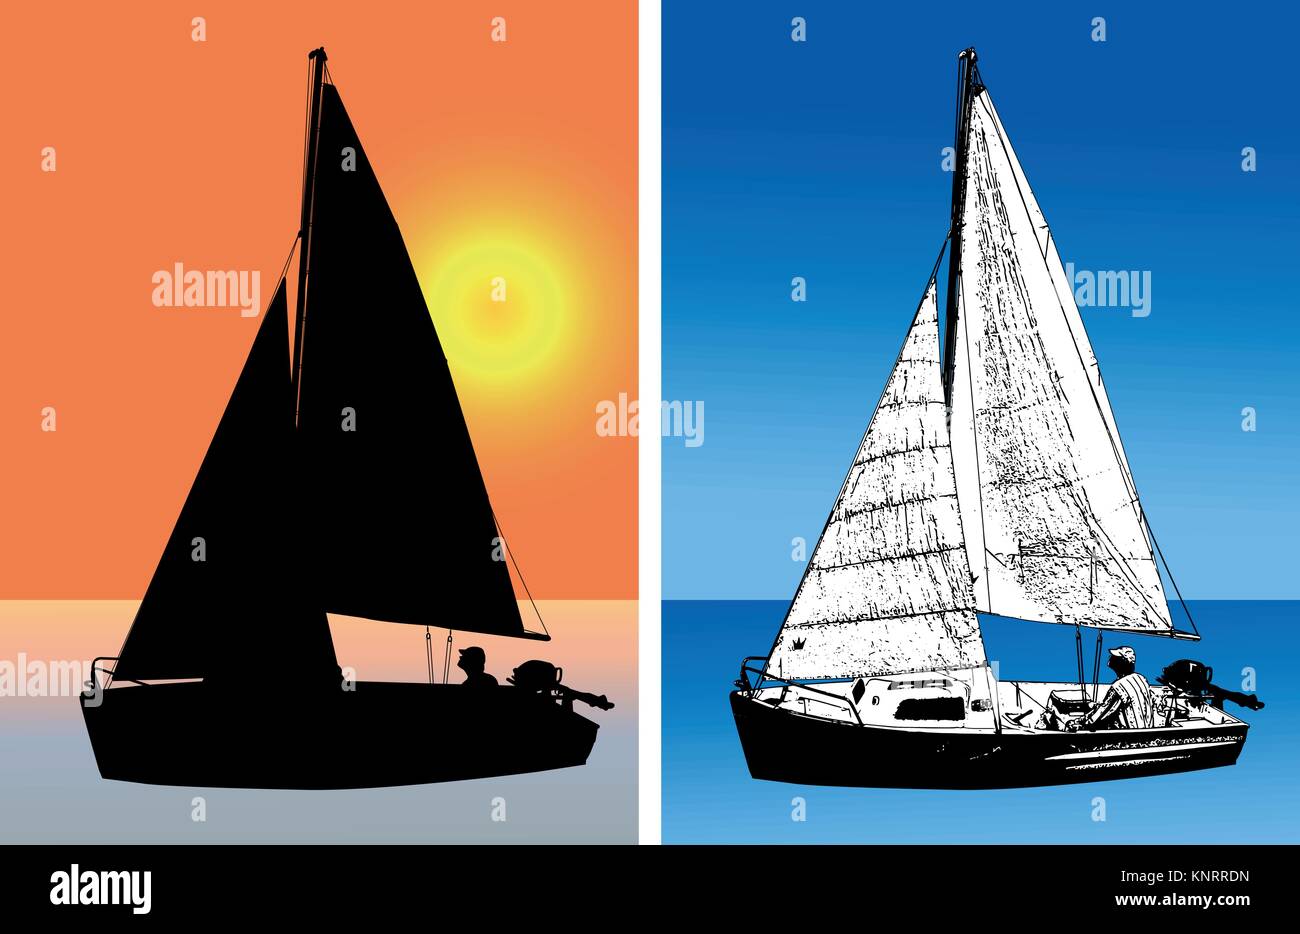 sailboat silhouette and sketch illustration - vector Stock Vector